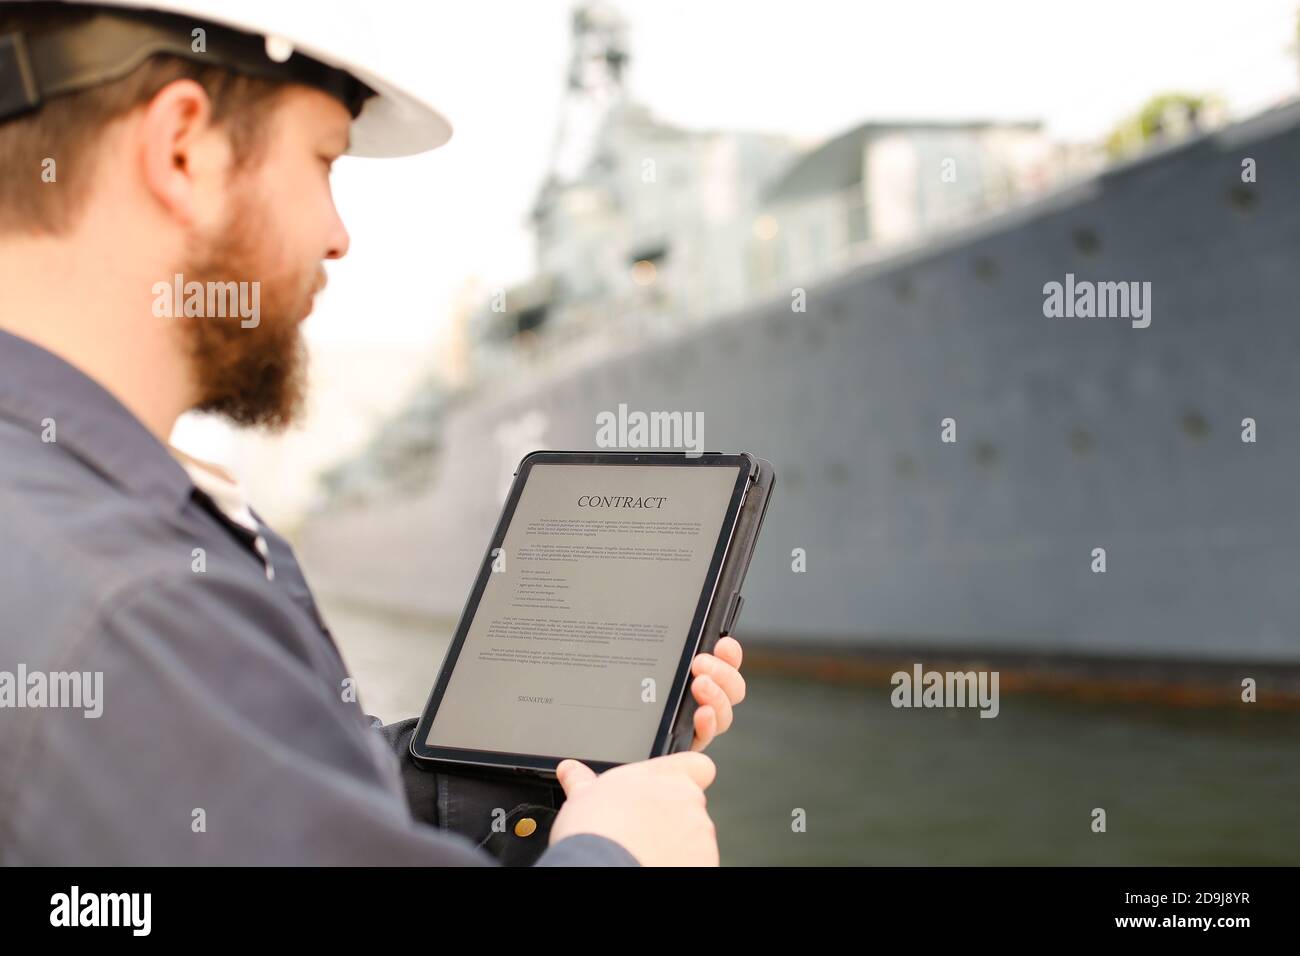 First mate reading contract on tablet near vessel in background. Stock Photo